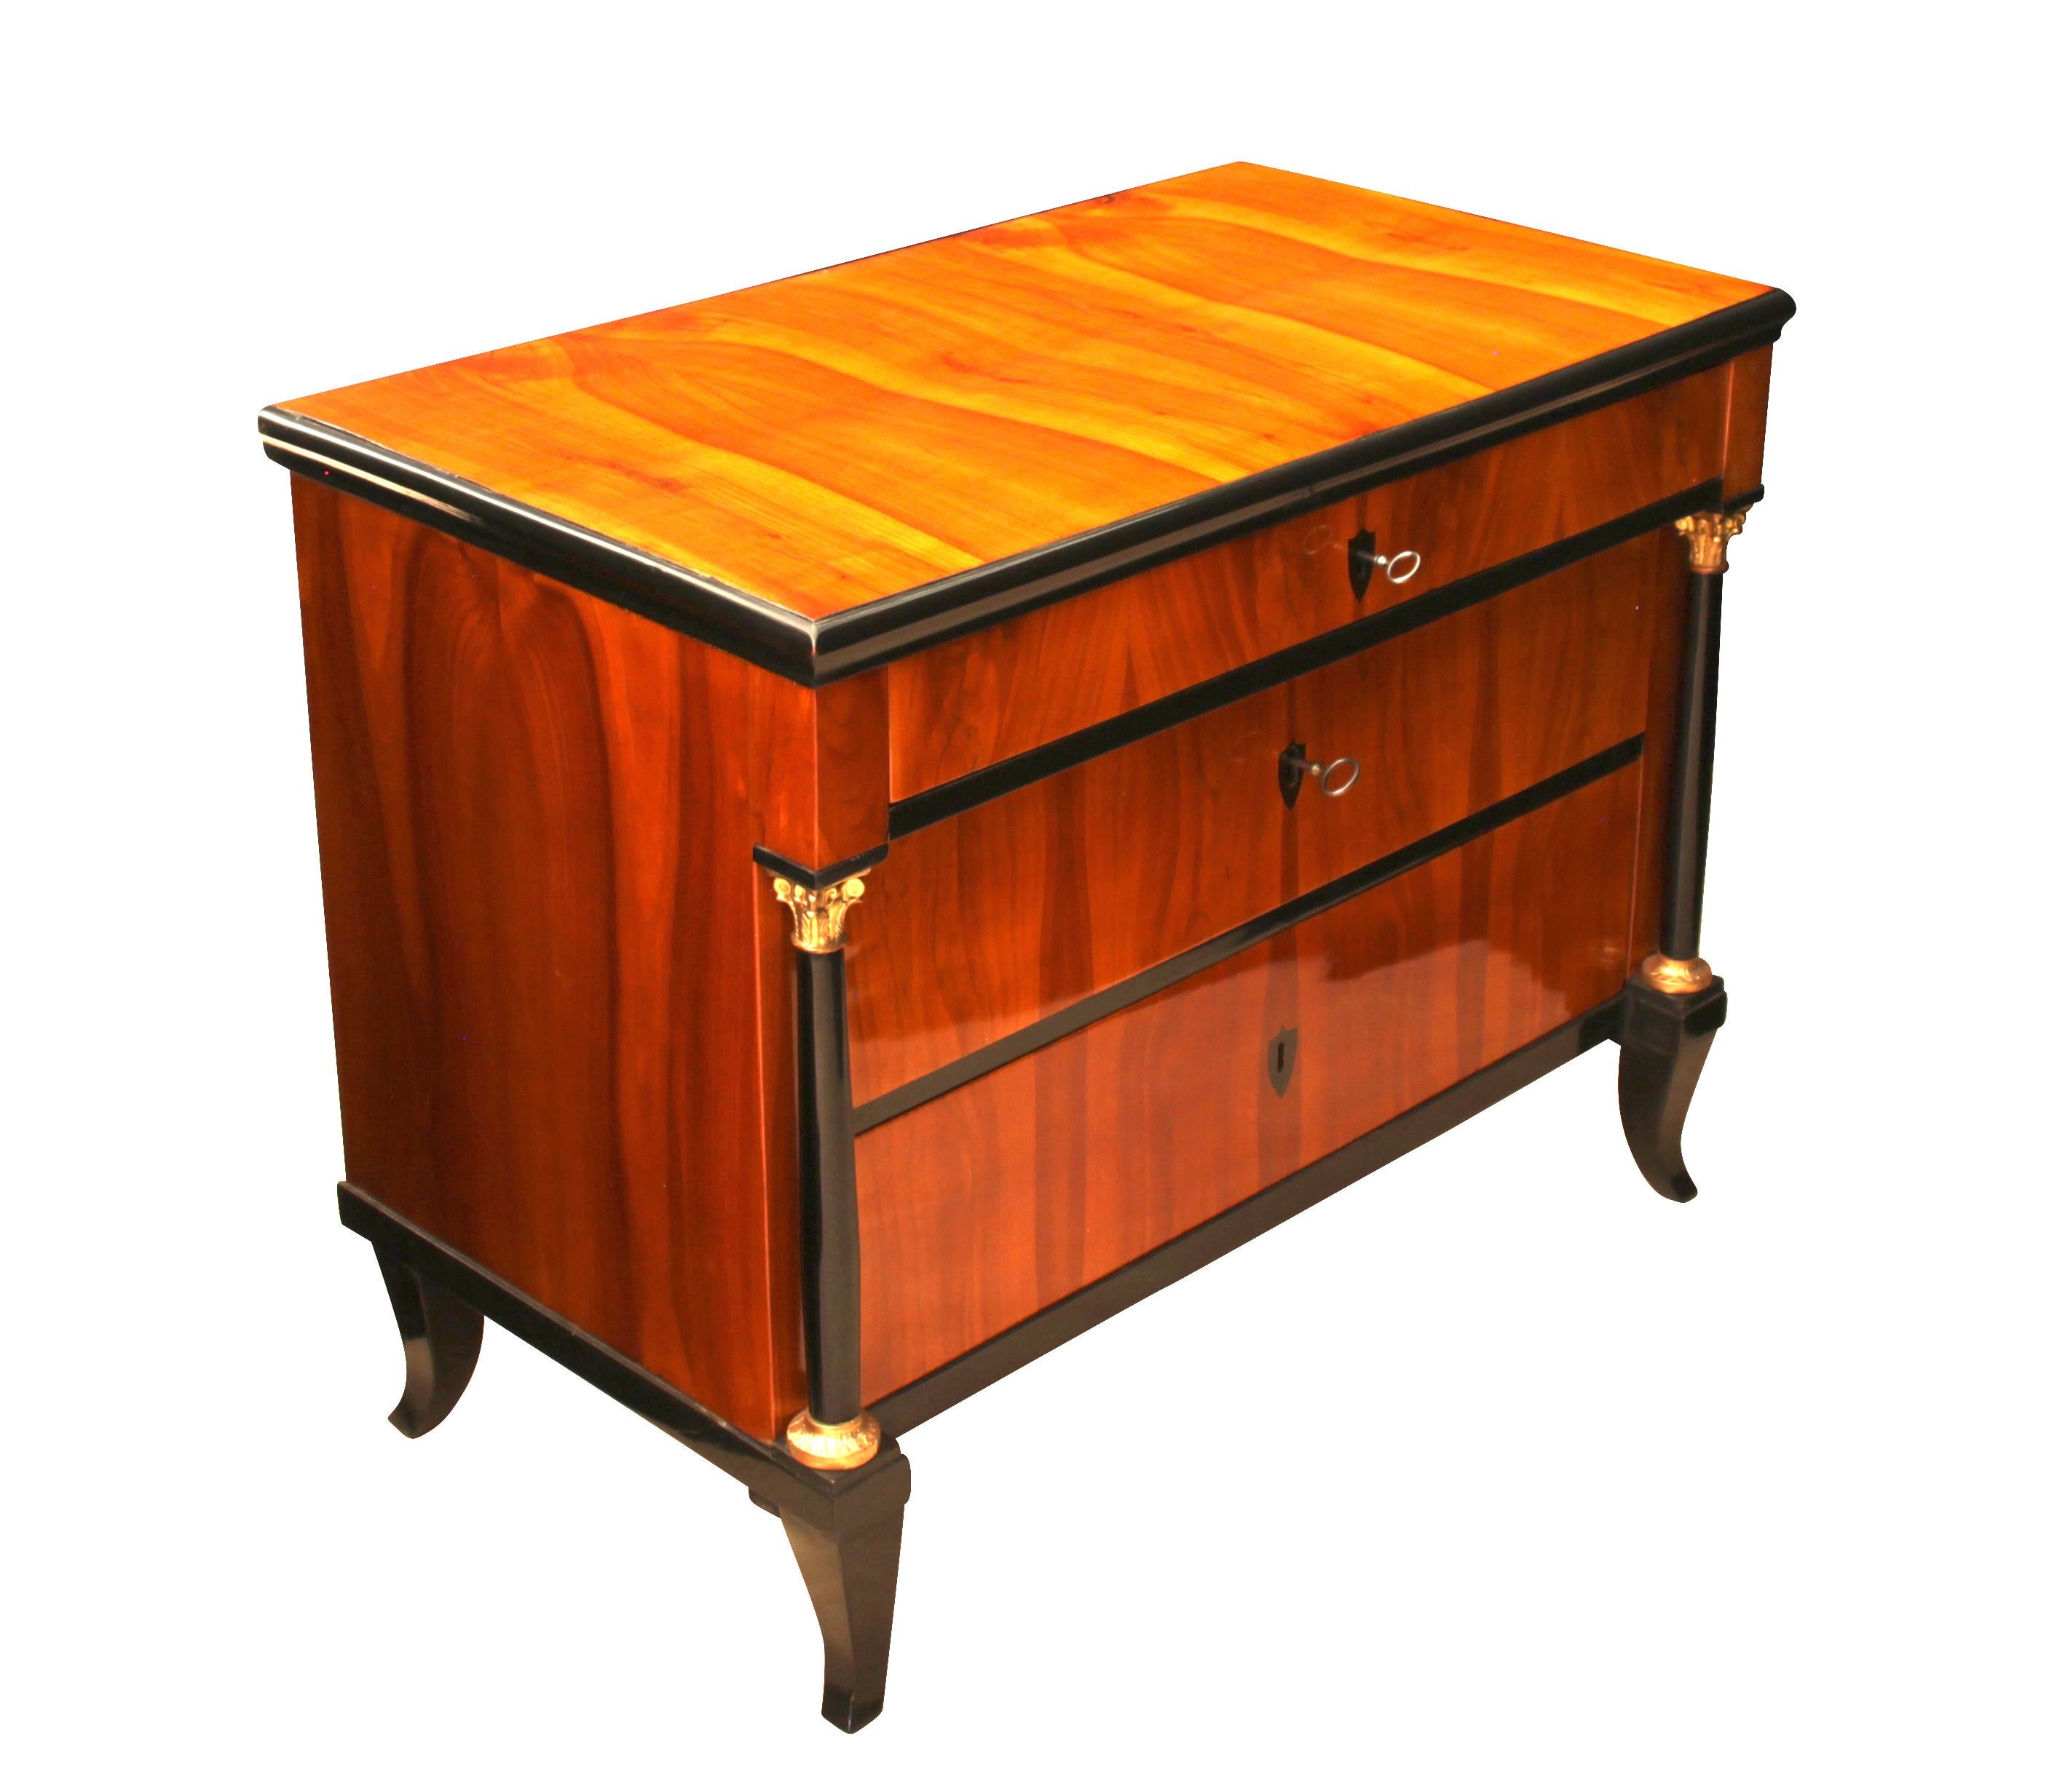 Very elegant, petite original Commode/Chest of Three Drawers from about 1815, marking the transition from Empire to early Biedermeier. 
It has two black bottle-shaped full-columns with gold-plated corinthian capitals and bases. The beautiful bright